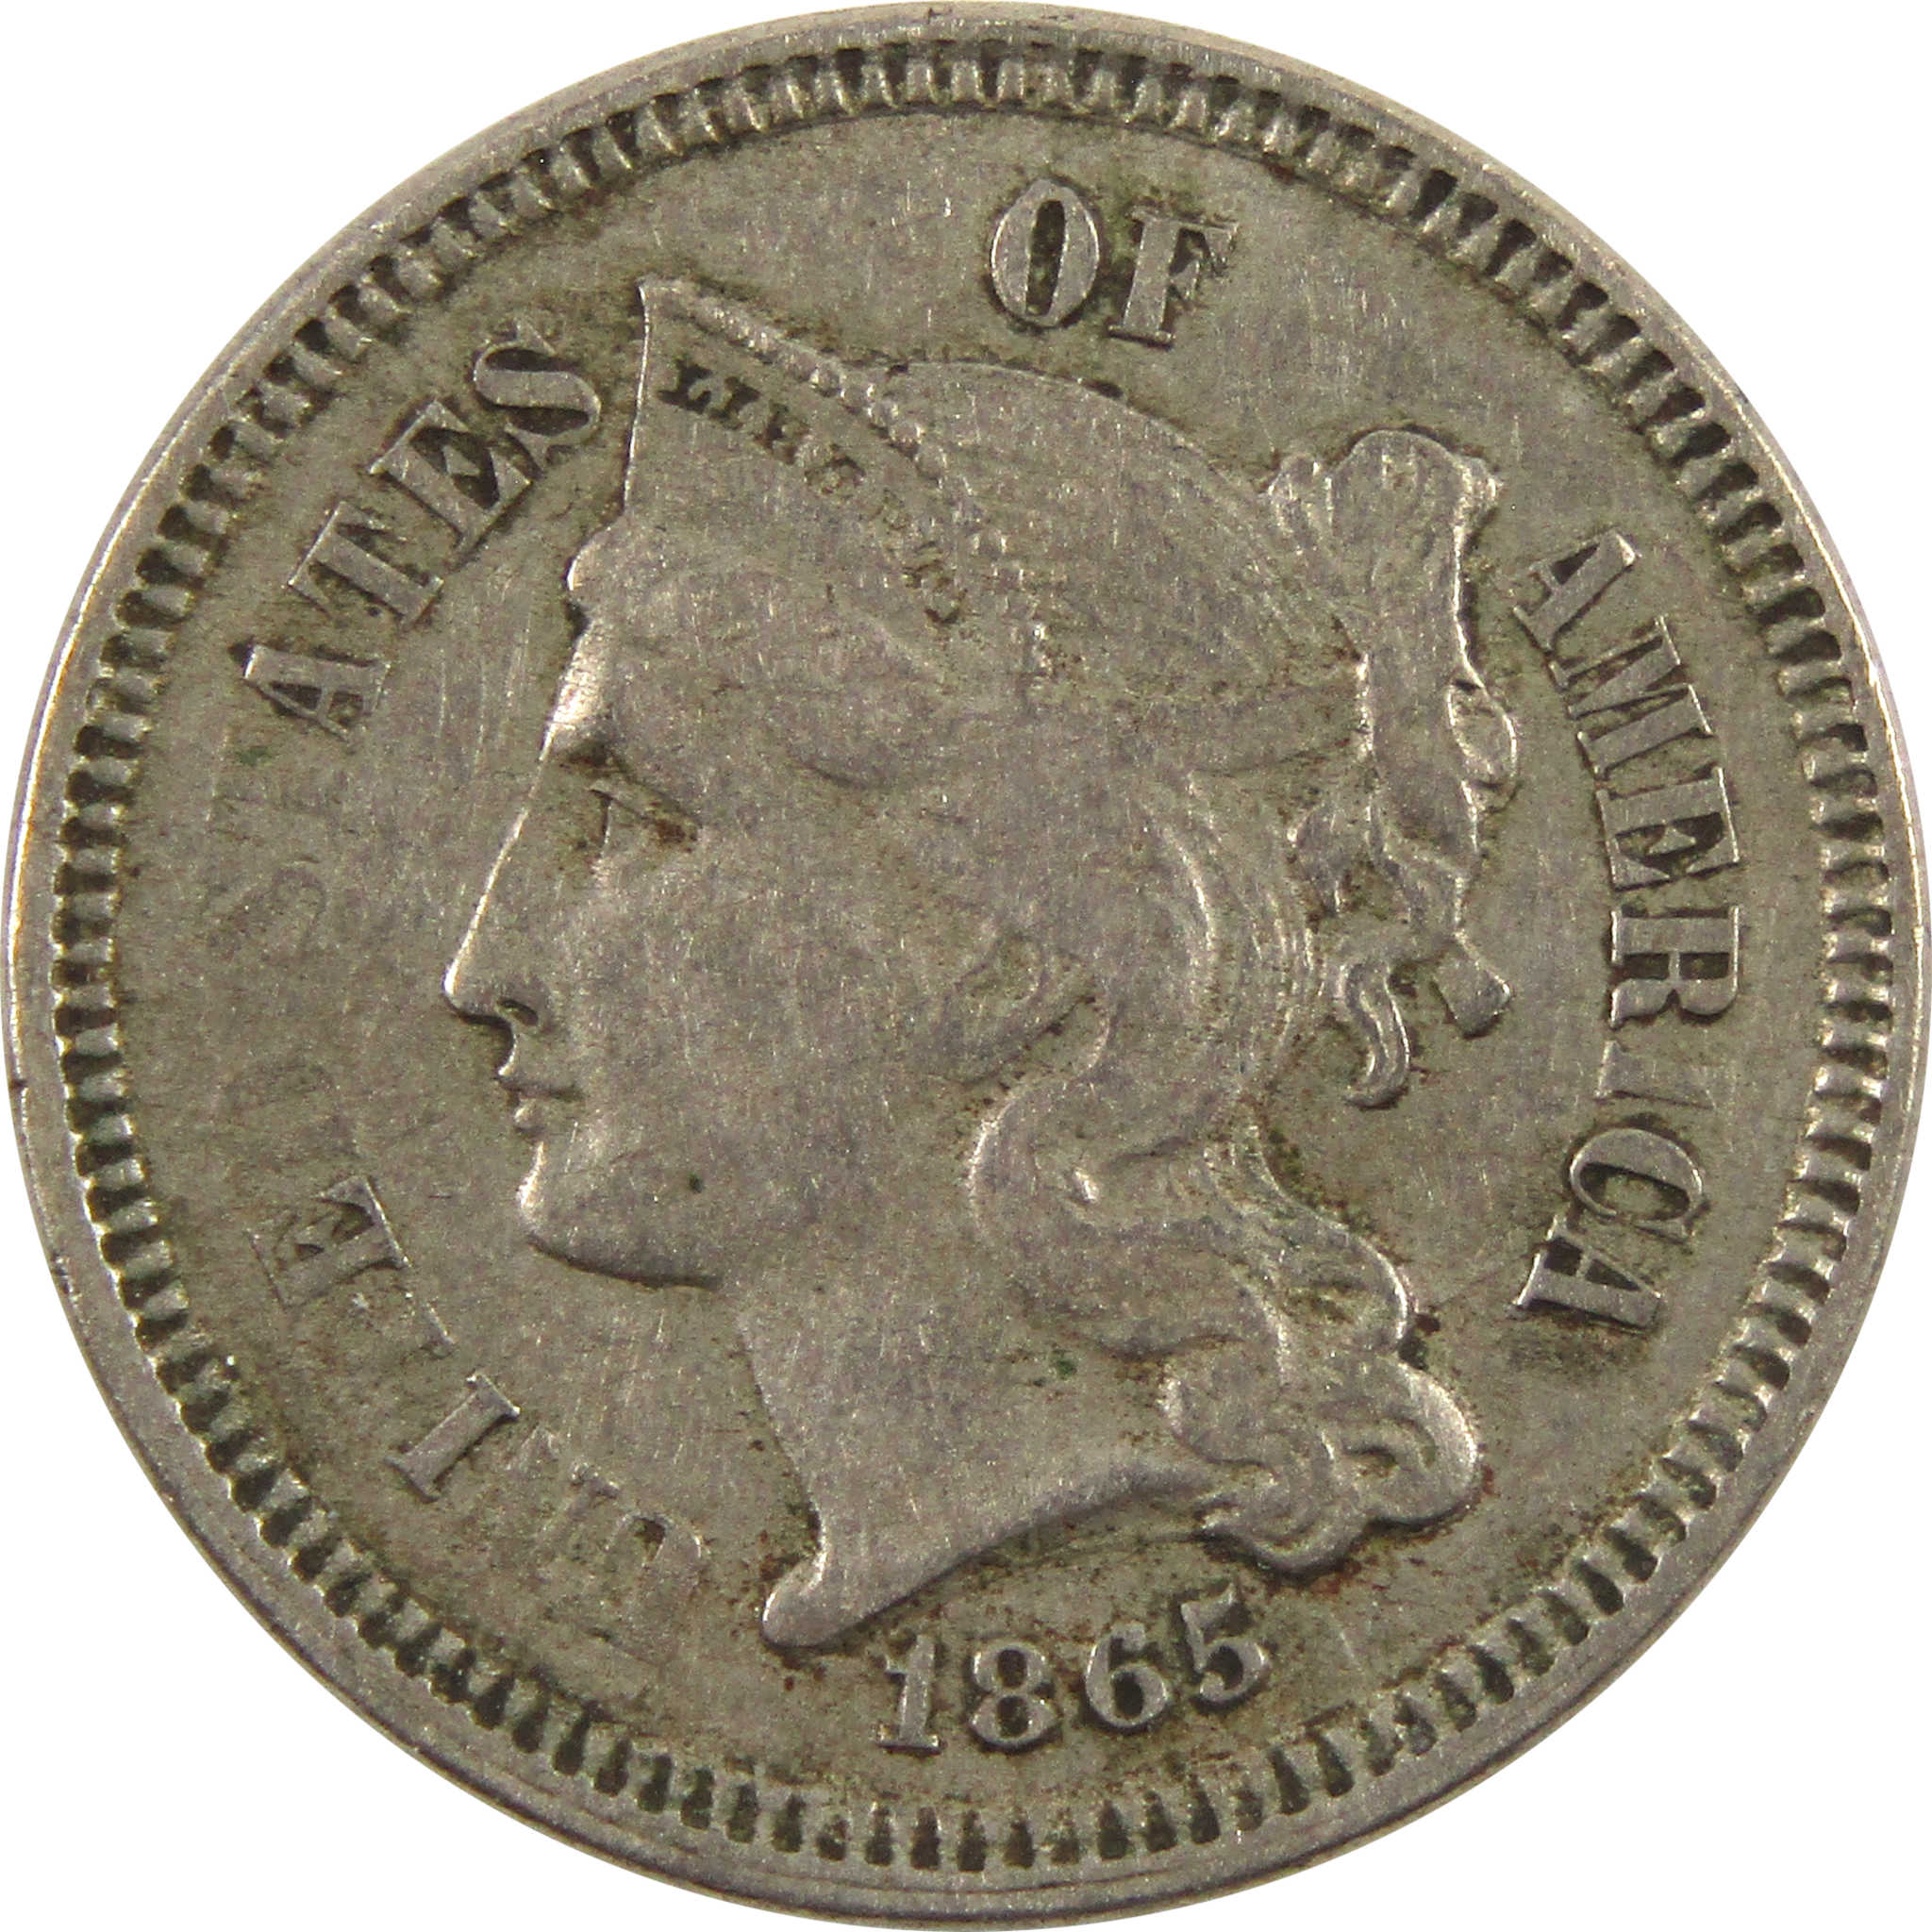 1865 Nickel Three Cent Piece XF EF Extremely Fine 3c Coin SKU:I11163